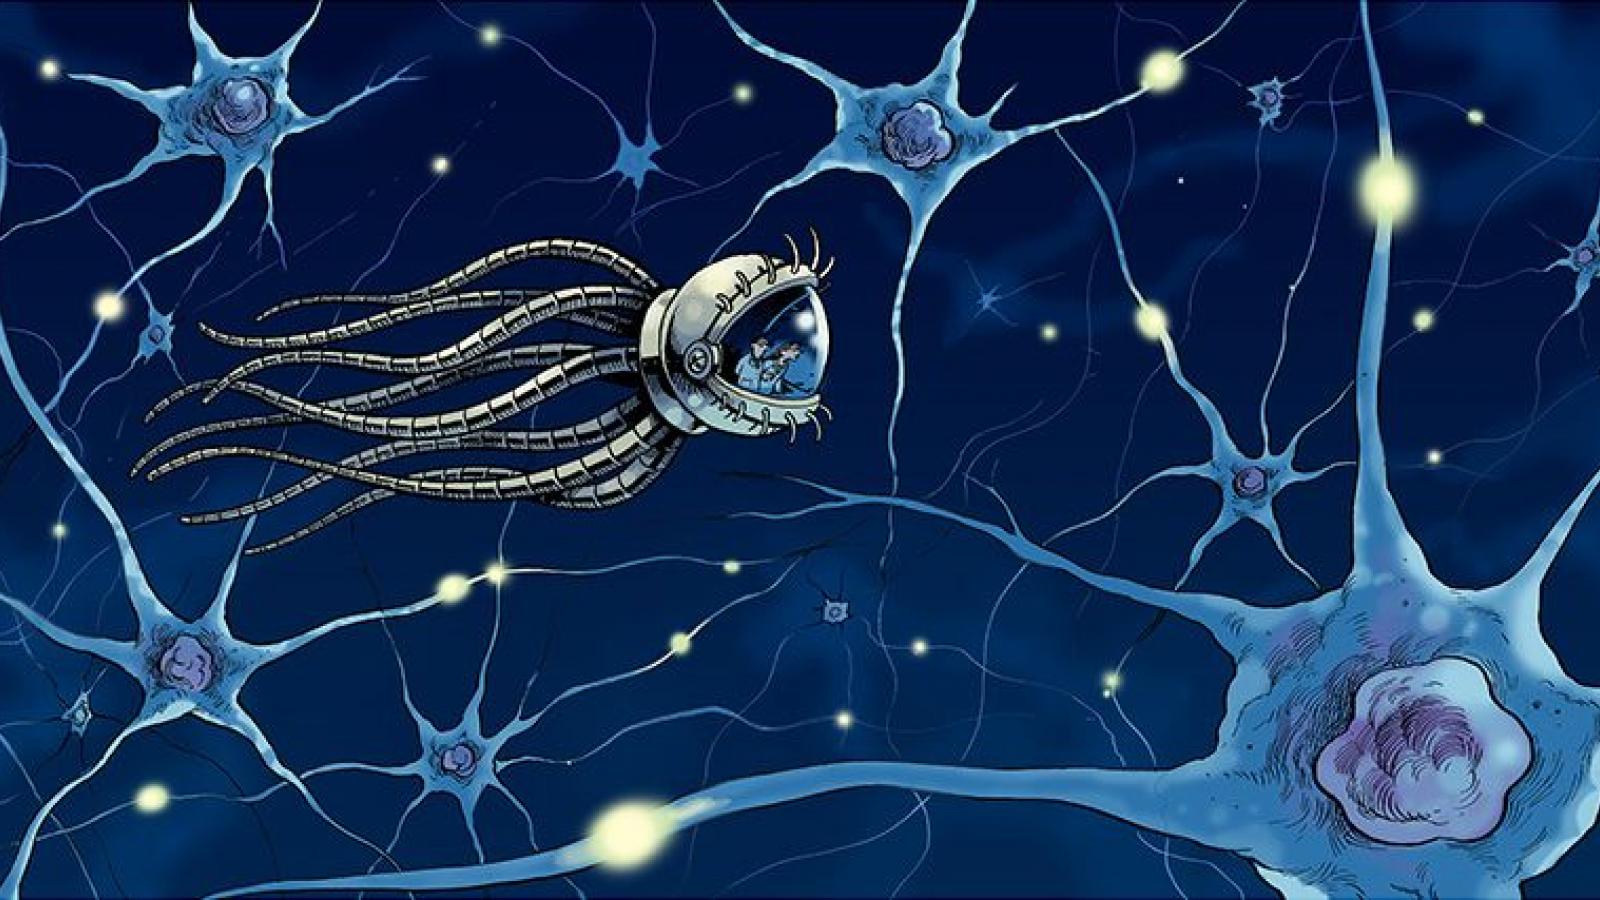 Picture of miniature people instead a spaceship within the brain, alongside close-up images of neurons